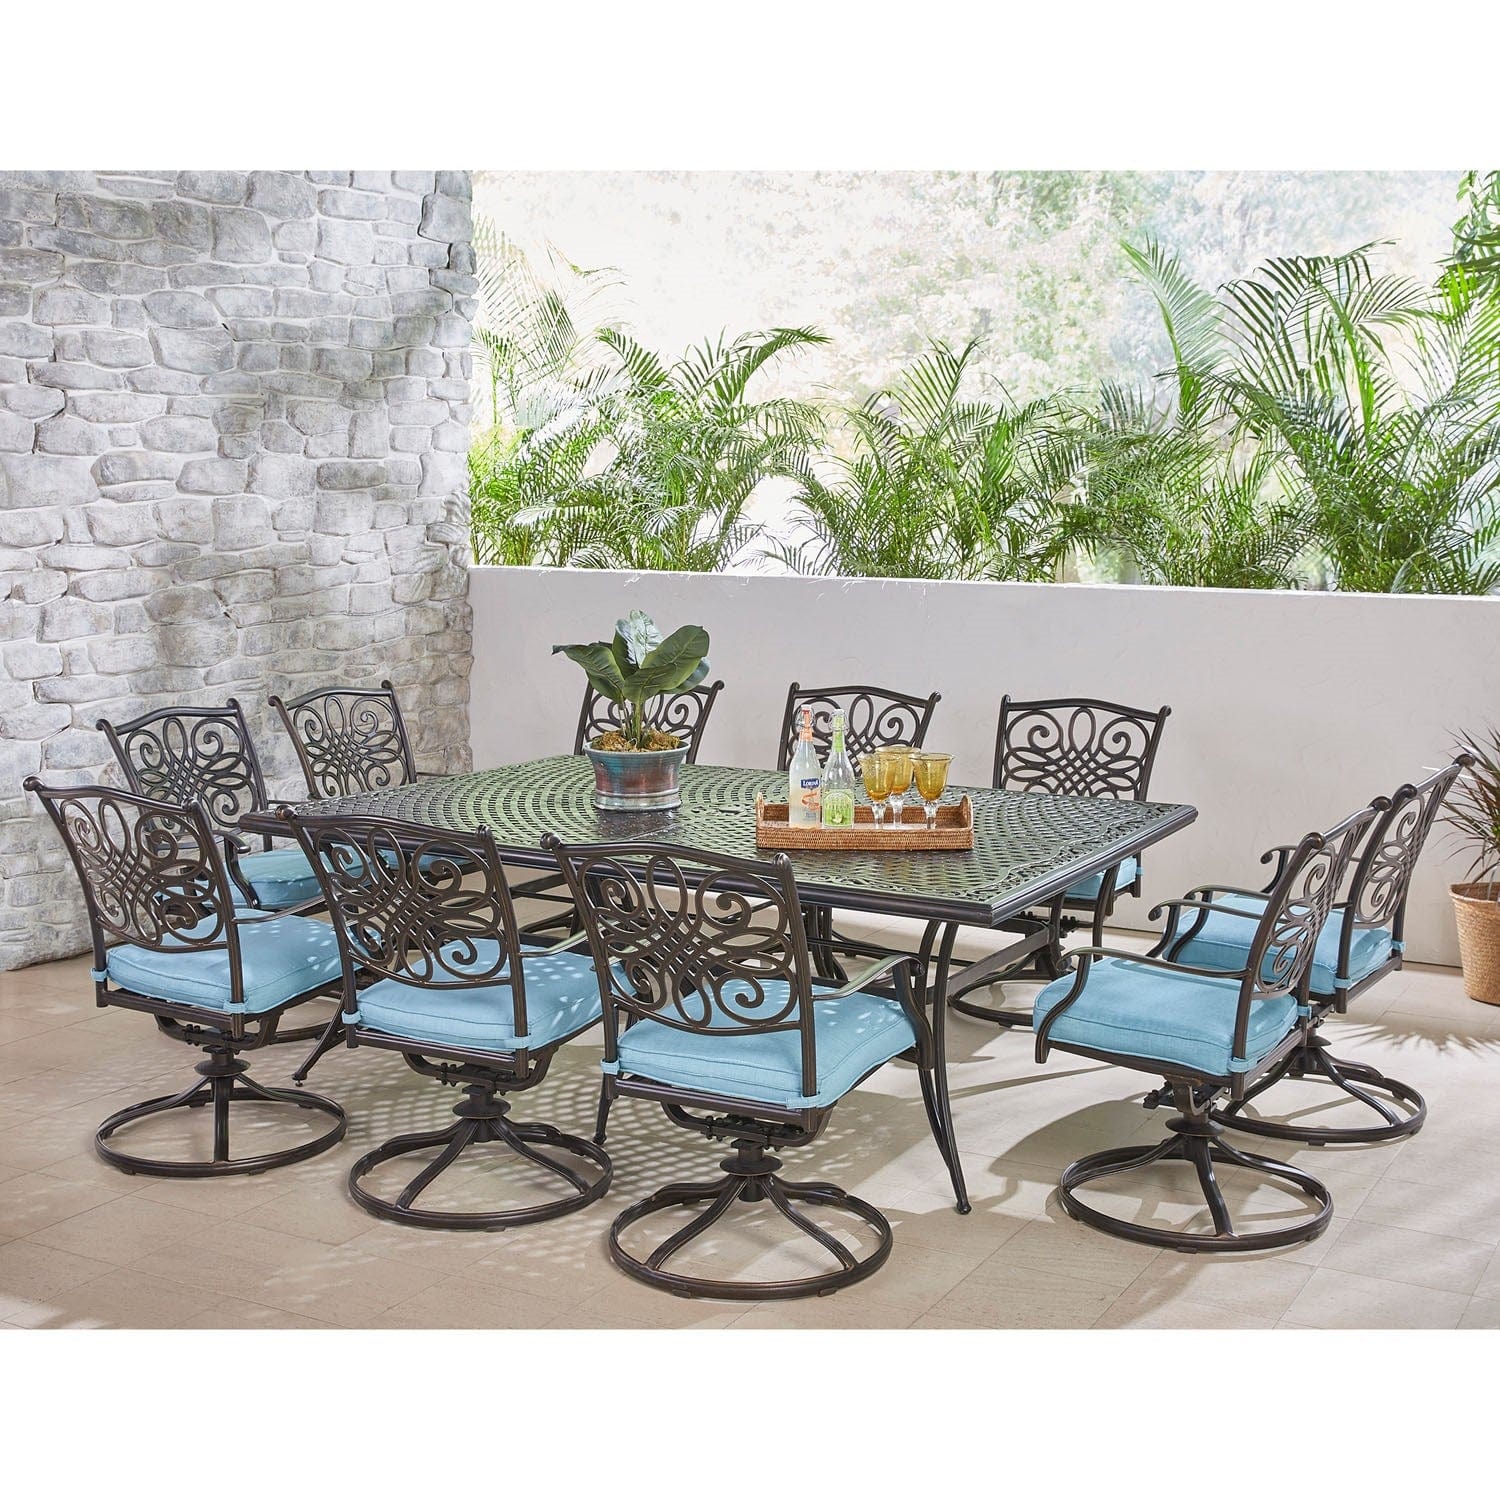 Hanover Outdoor Dining Set Hanover - Traditions 11-Piece Dining Set in Blue with Ten Swivel Rockers and an Extra-Long Dining Table - TRADDN11PCSW10-BLU